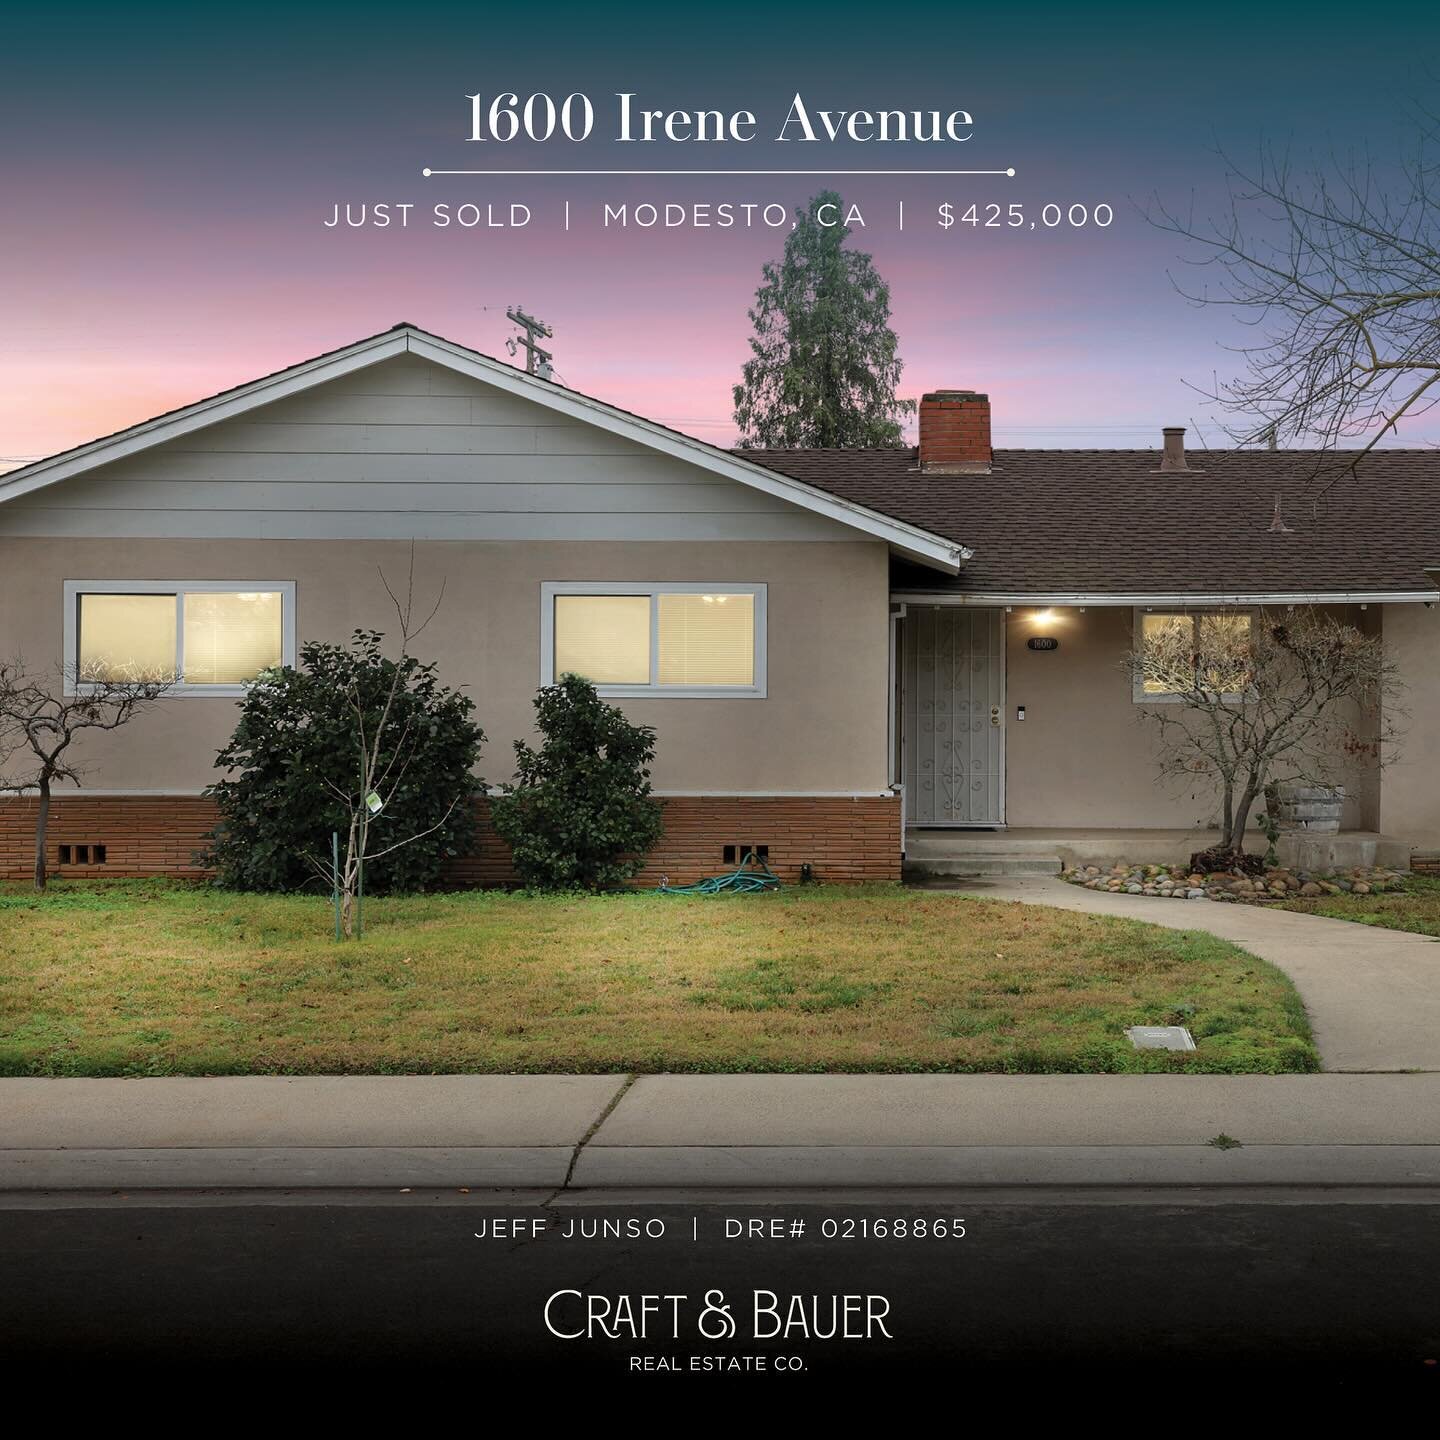 JUST SOLD 🎉 Congratulations to the new owners of this charming 3 bedroom home! ⁠
⁠
🏡 1600 Irene Avenue⁠
📍 Modesto, CA⁠
💰 $425,000⁠
⁠
Nestled away in a cul-de-sac, original hardwood floors hiding under the carpet, great location, and a backyard th